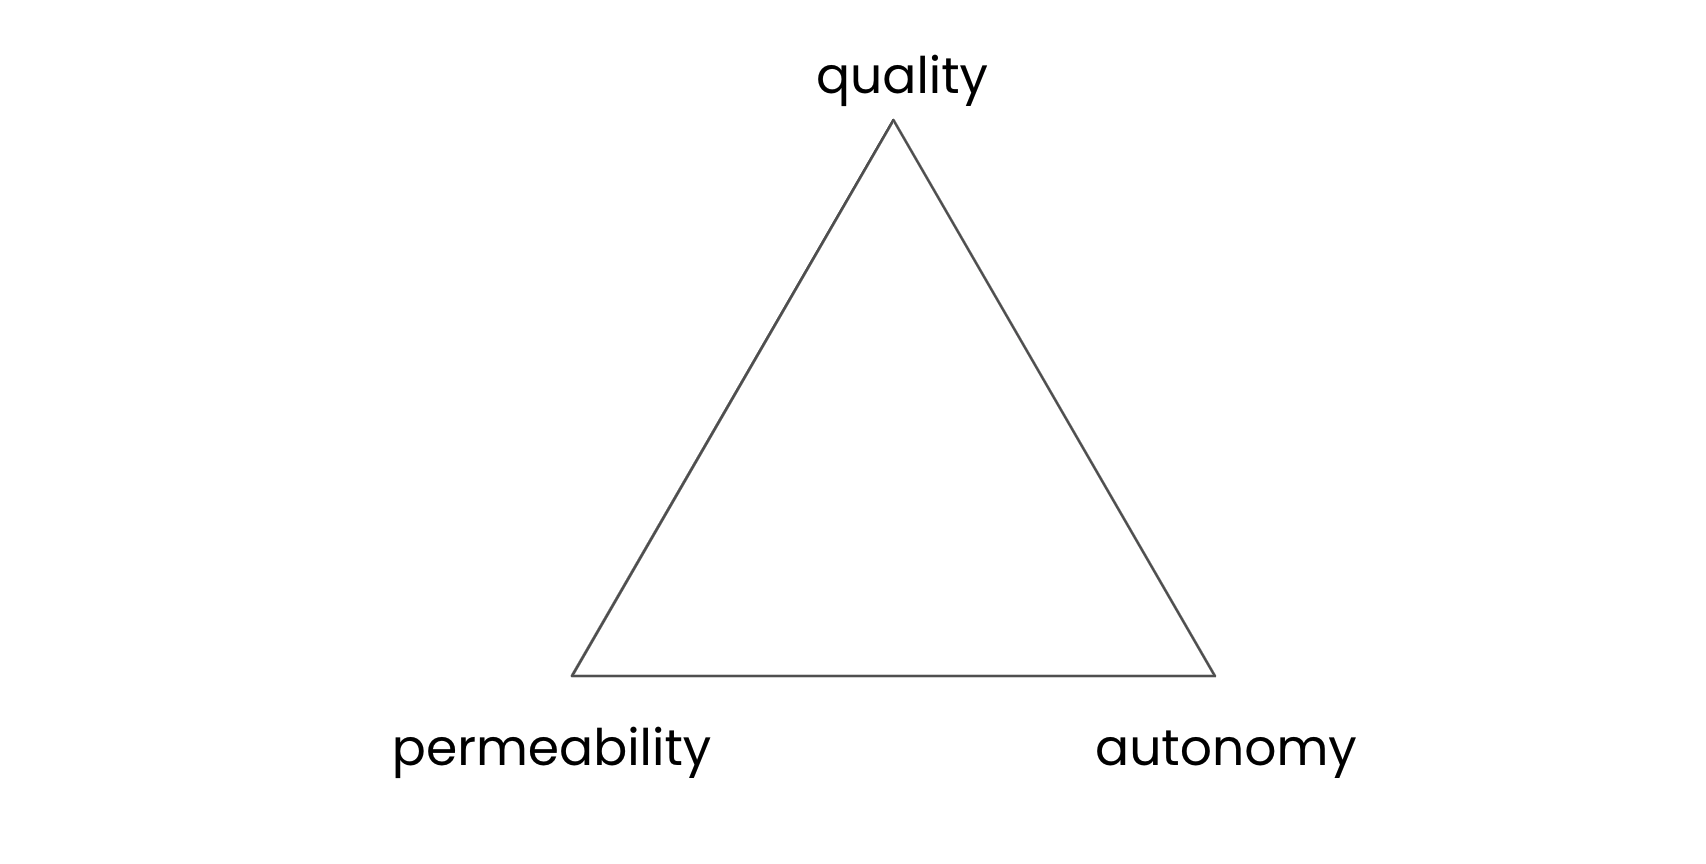 Quality of contributions, autonomy of contributors, and permeability of the organization—pick two